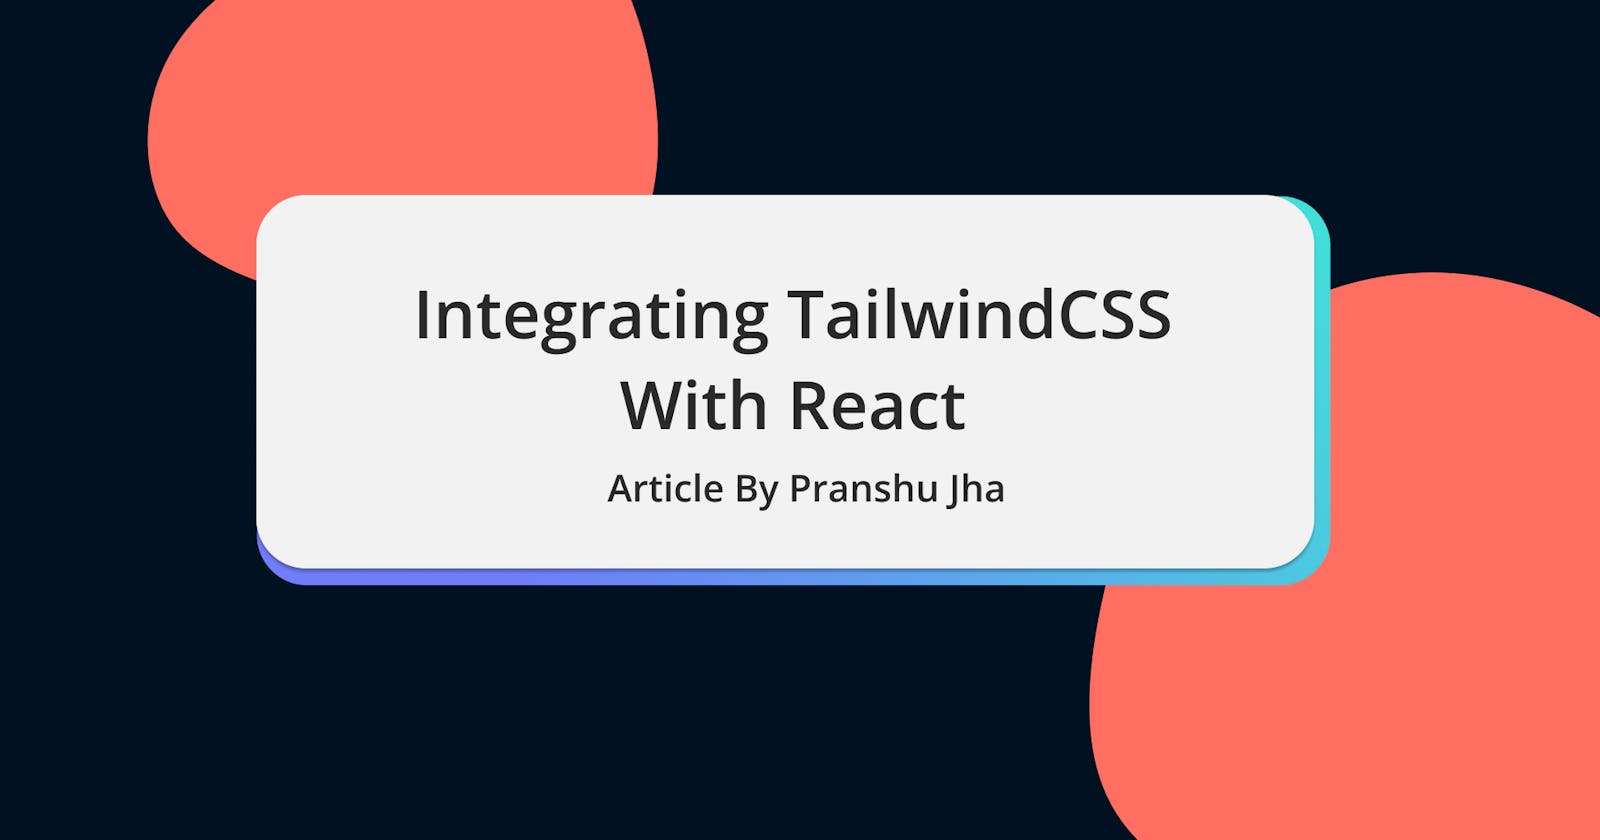 Integrating TailwindCSS with React in 3 simple steps!